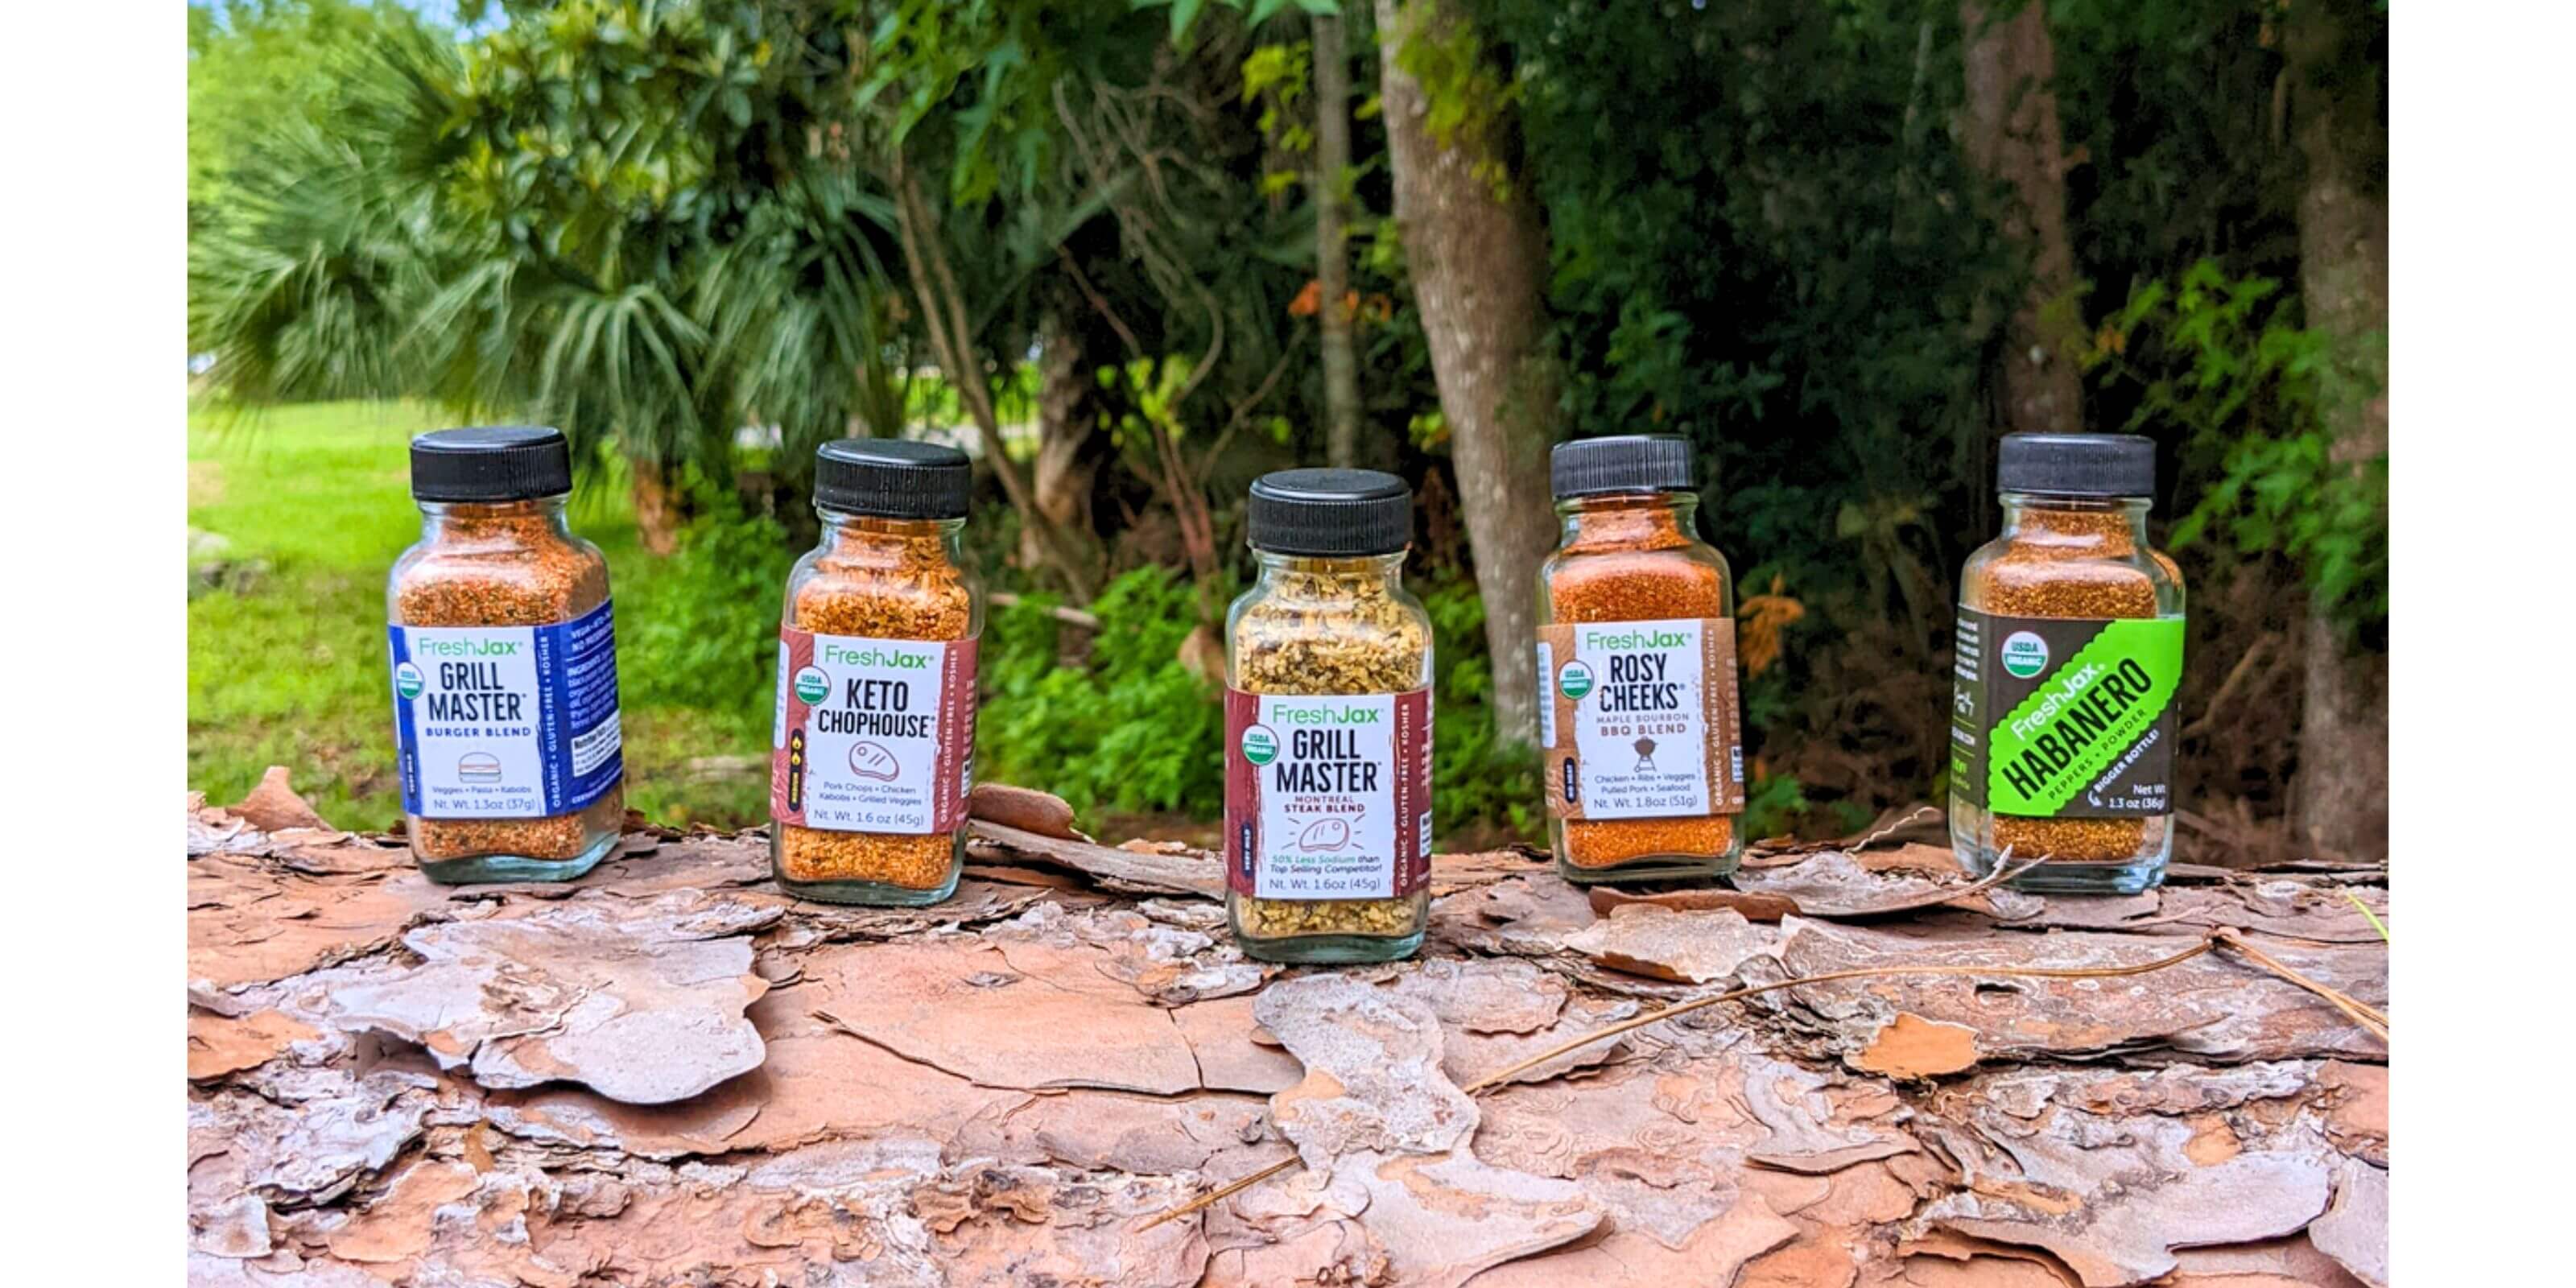 Sampler Size Organic Seasonings and Spices on a Fallen Tree